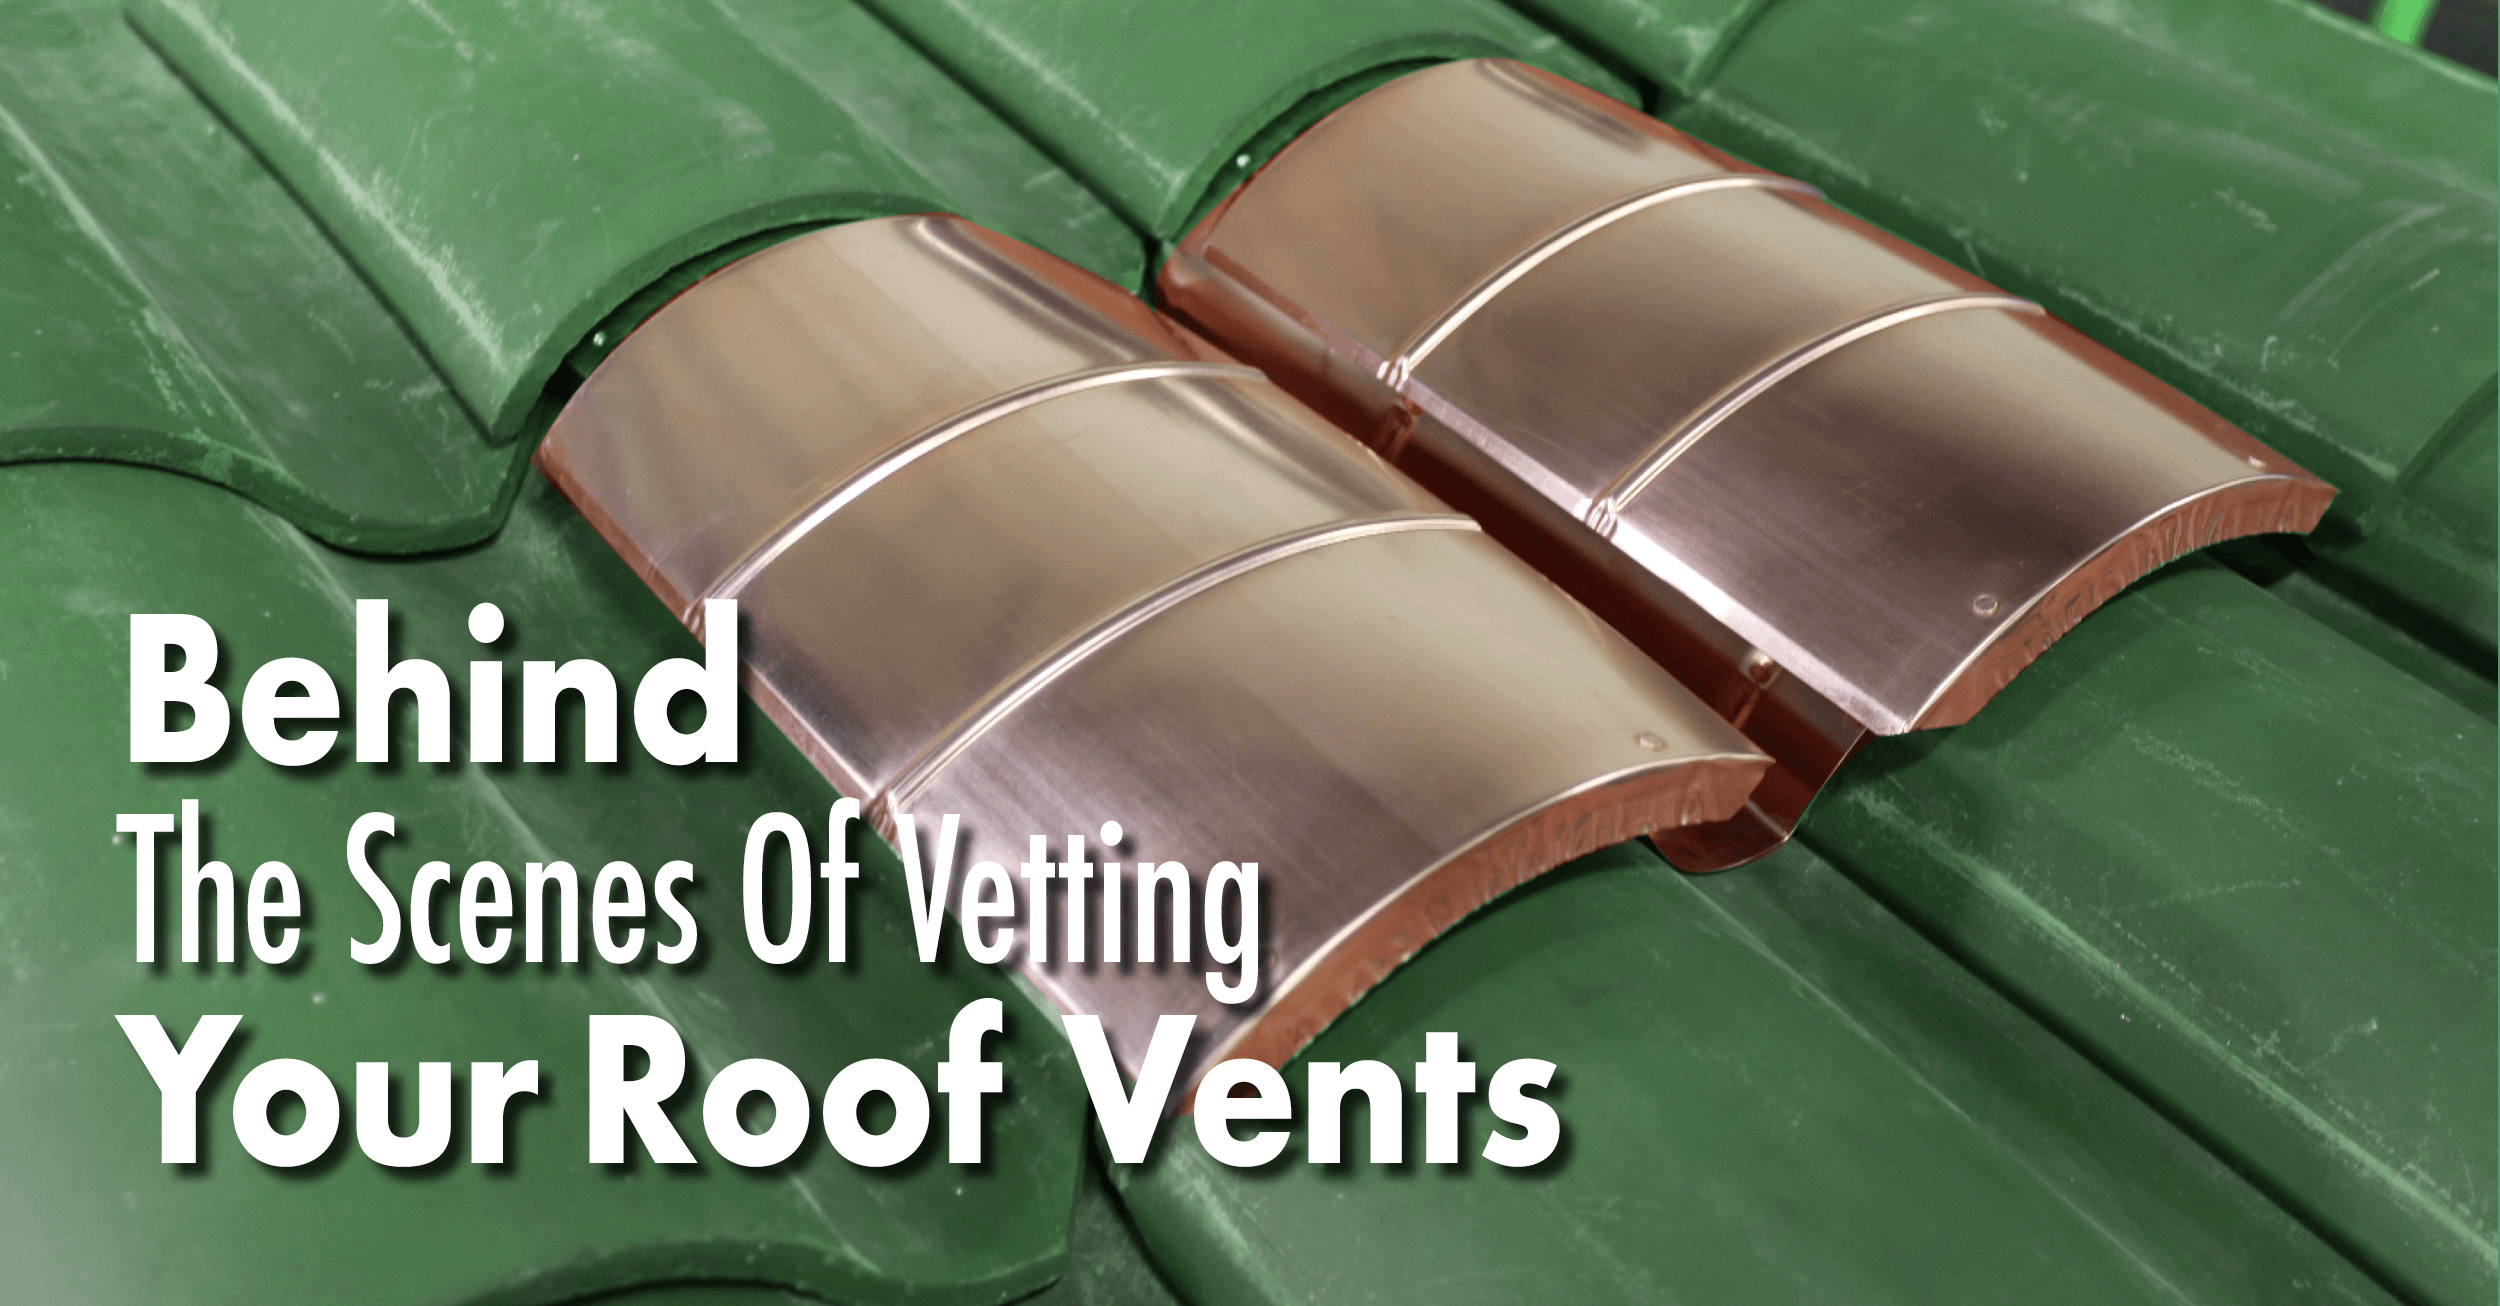 Behind The Scenes Of Vetting Your Roof Vents